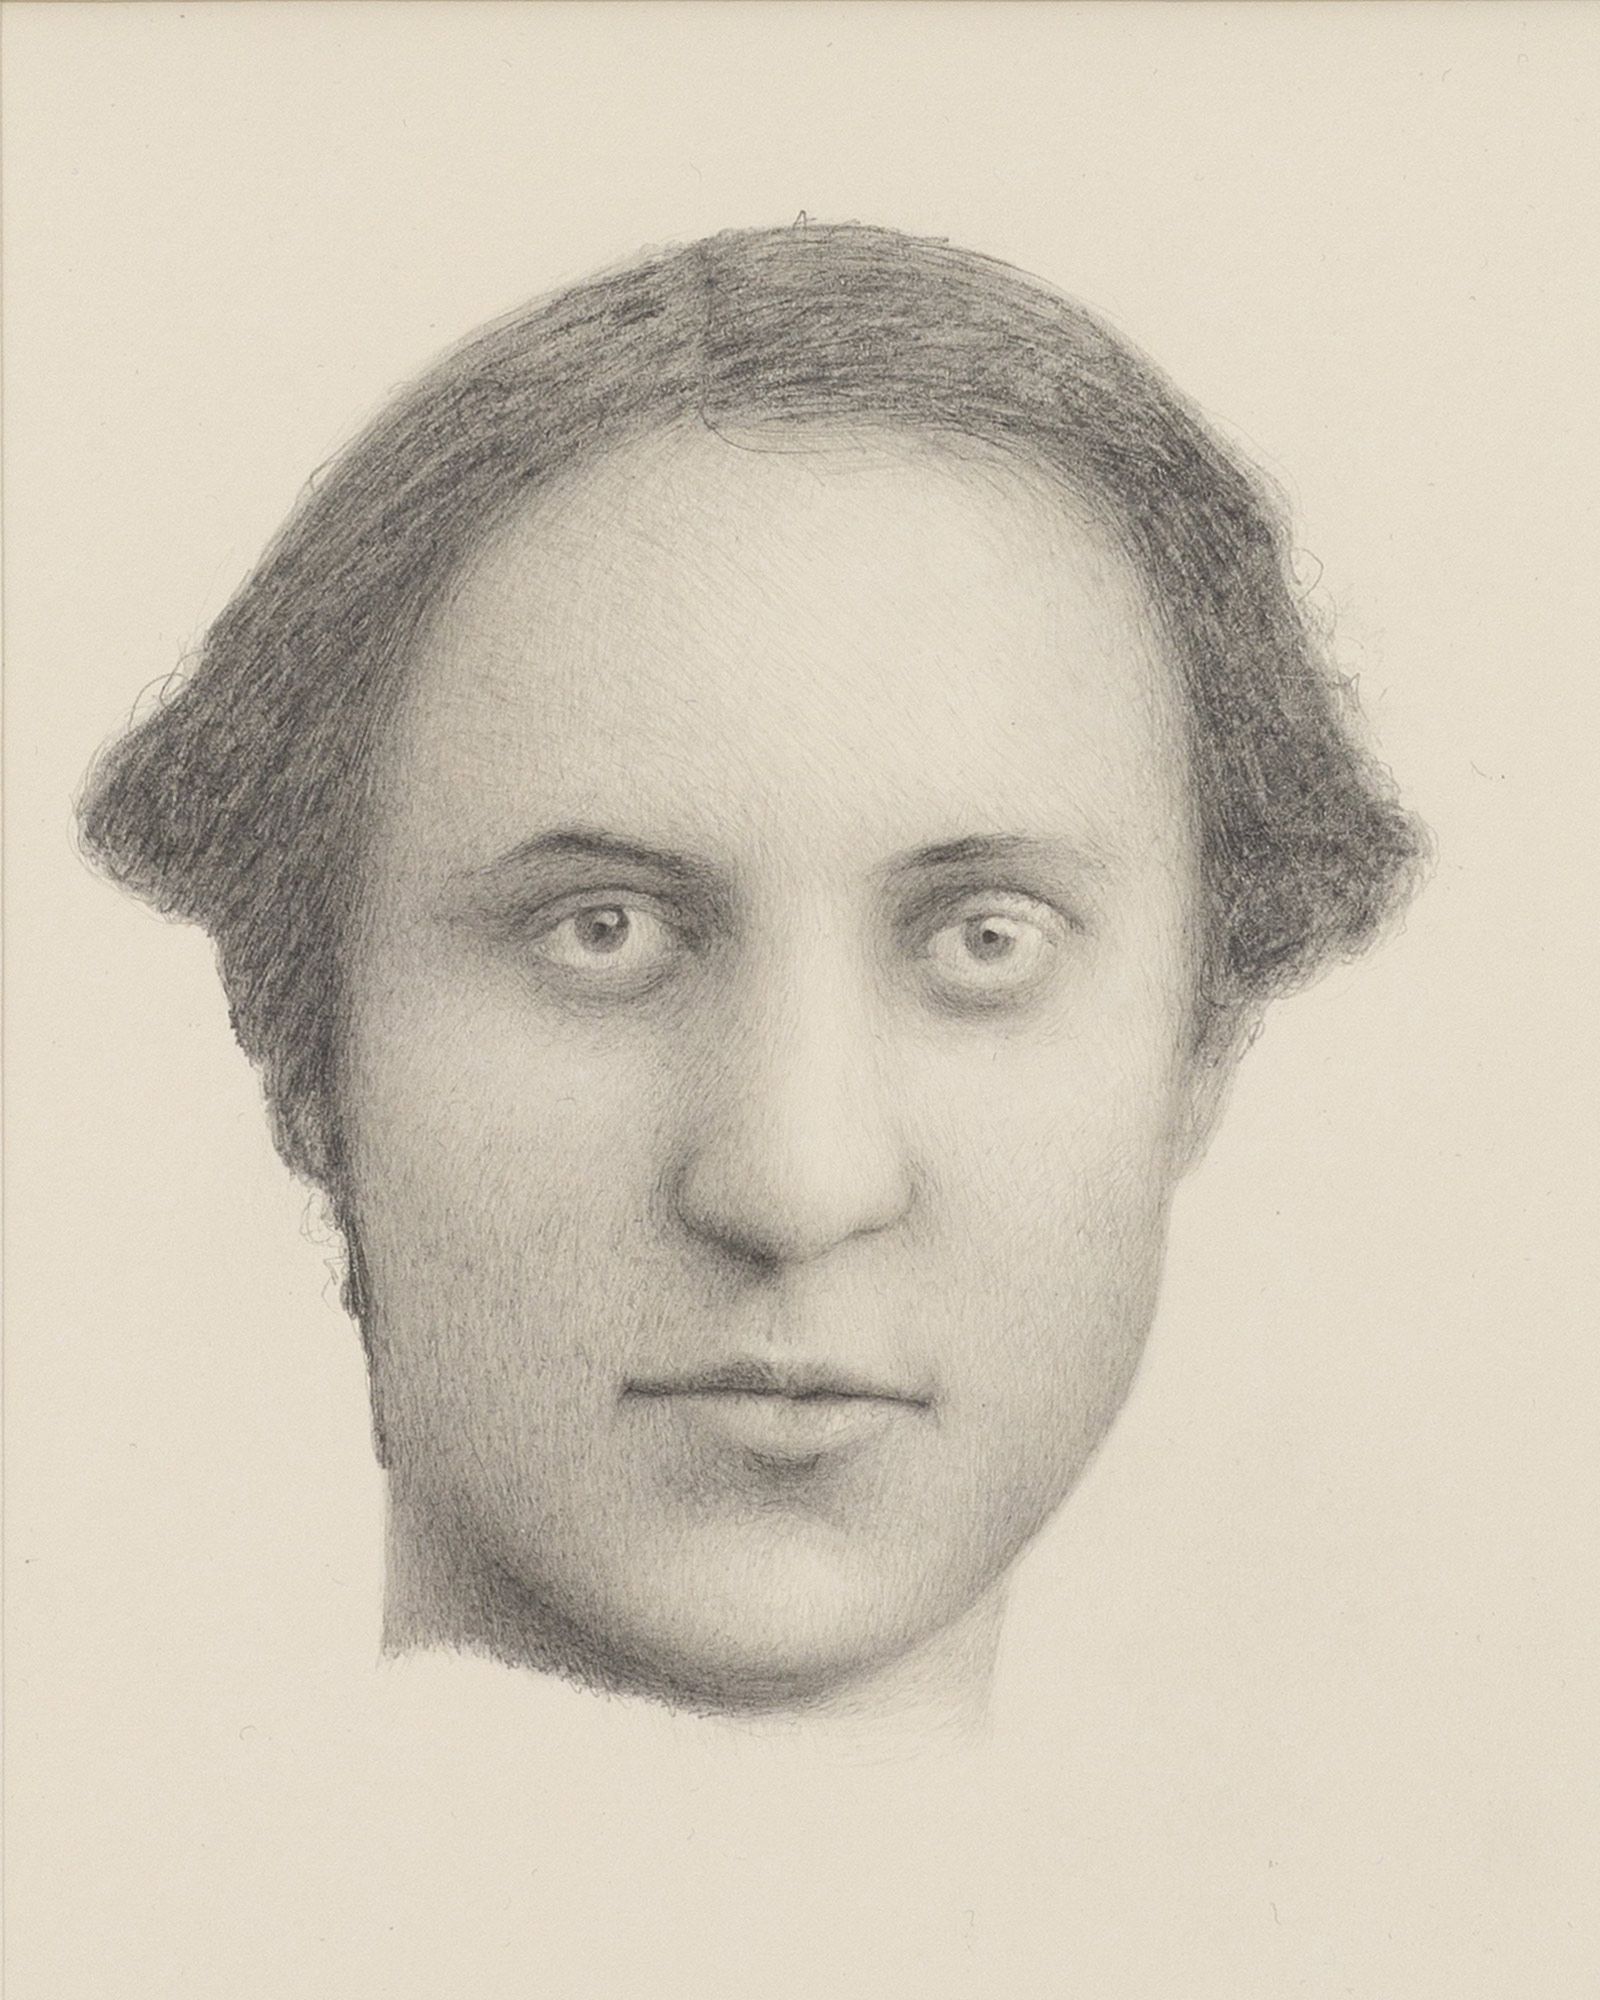 Detailed pencil portrait capturing deep-set eyes, defined lips, and wavy hair framing the face.